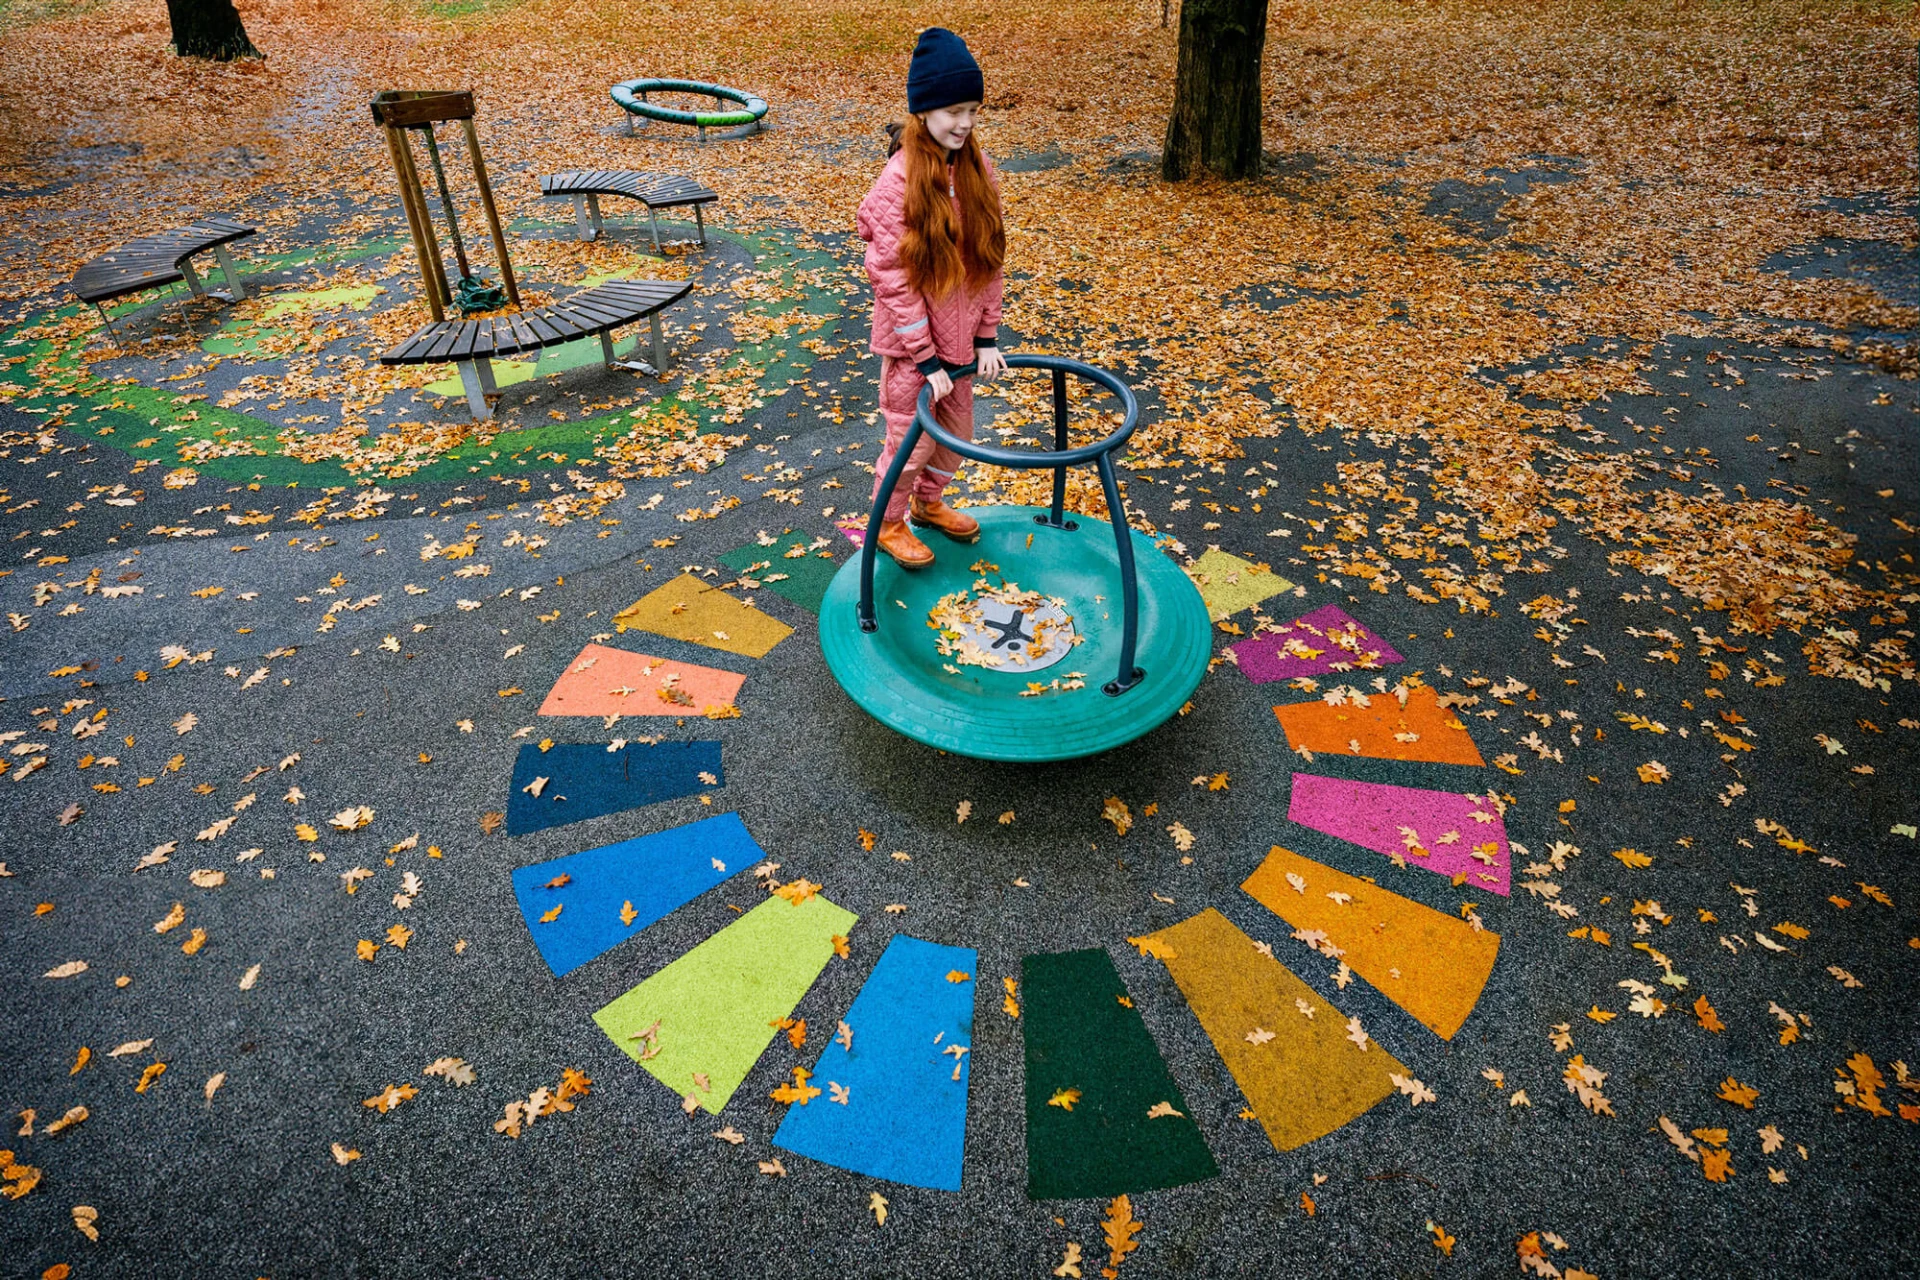 girl playing on playground spinner with colourful surfacing